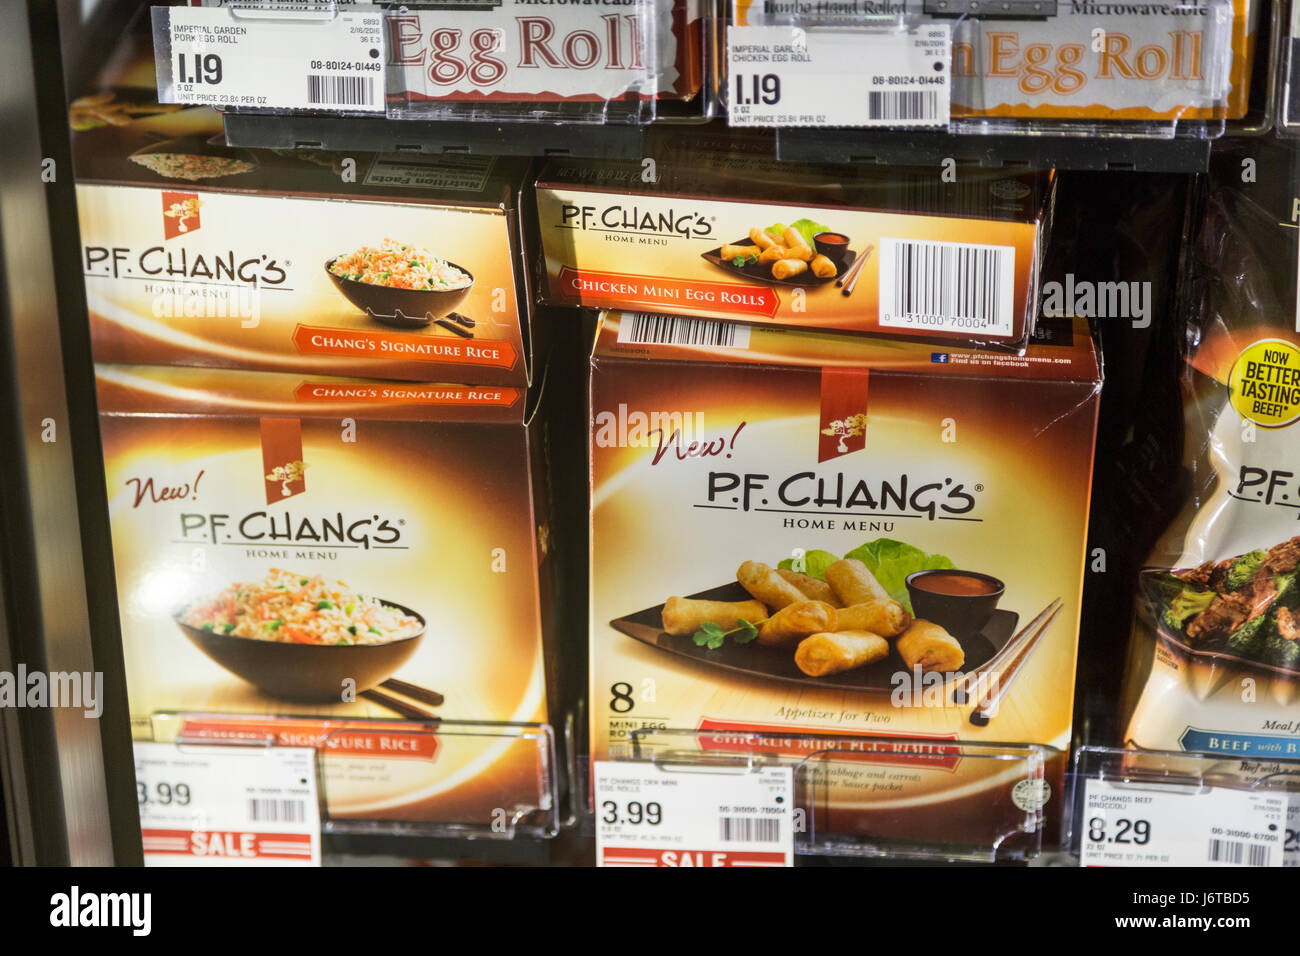 boxes of P.F.Chang's brand frozen food in the freezer section of a grocery store Stock Photo